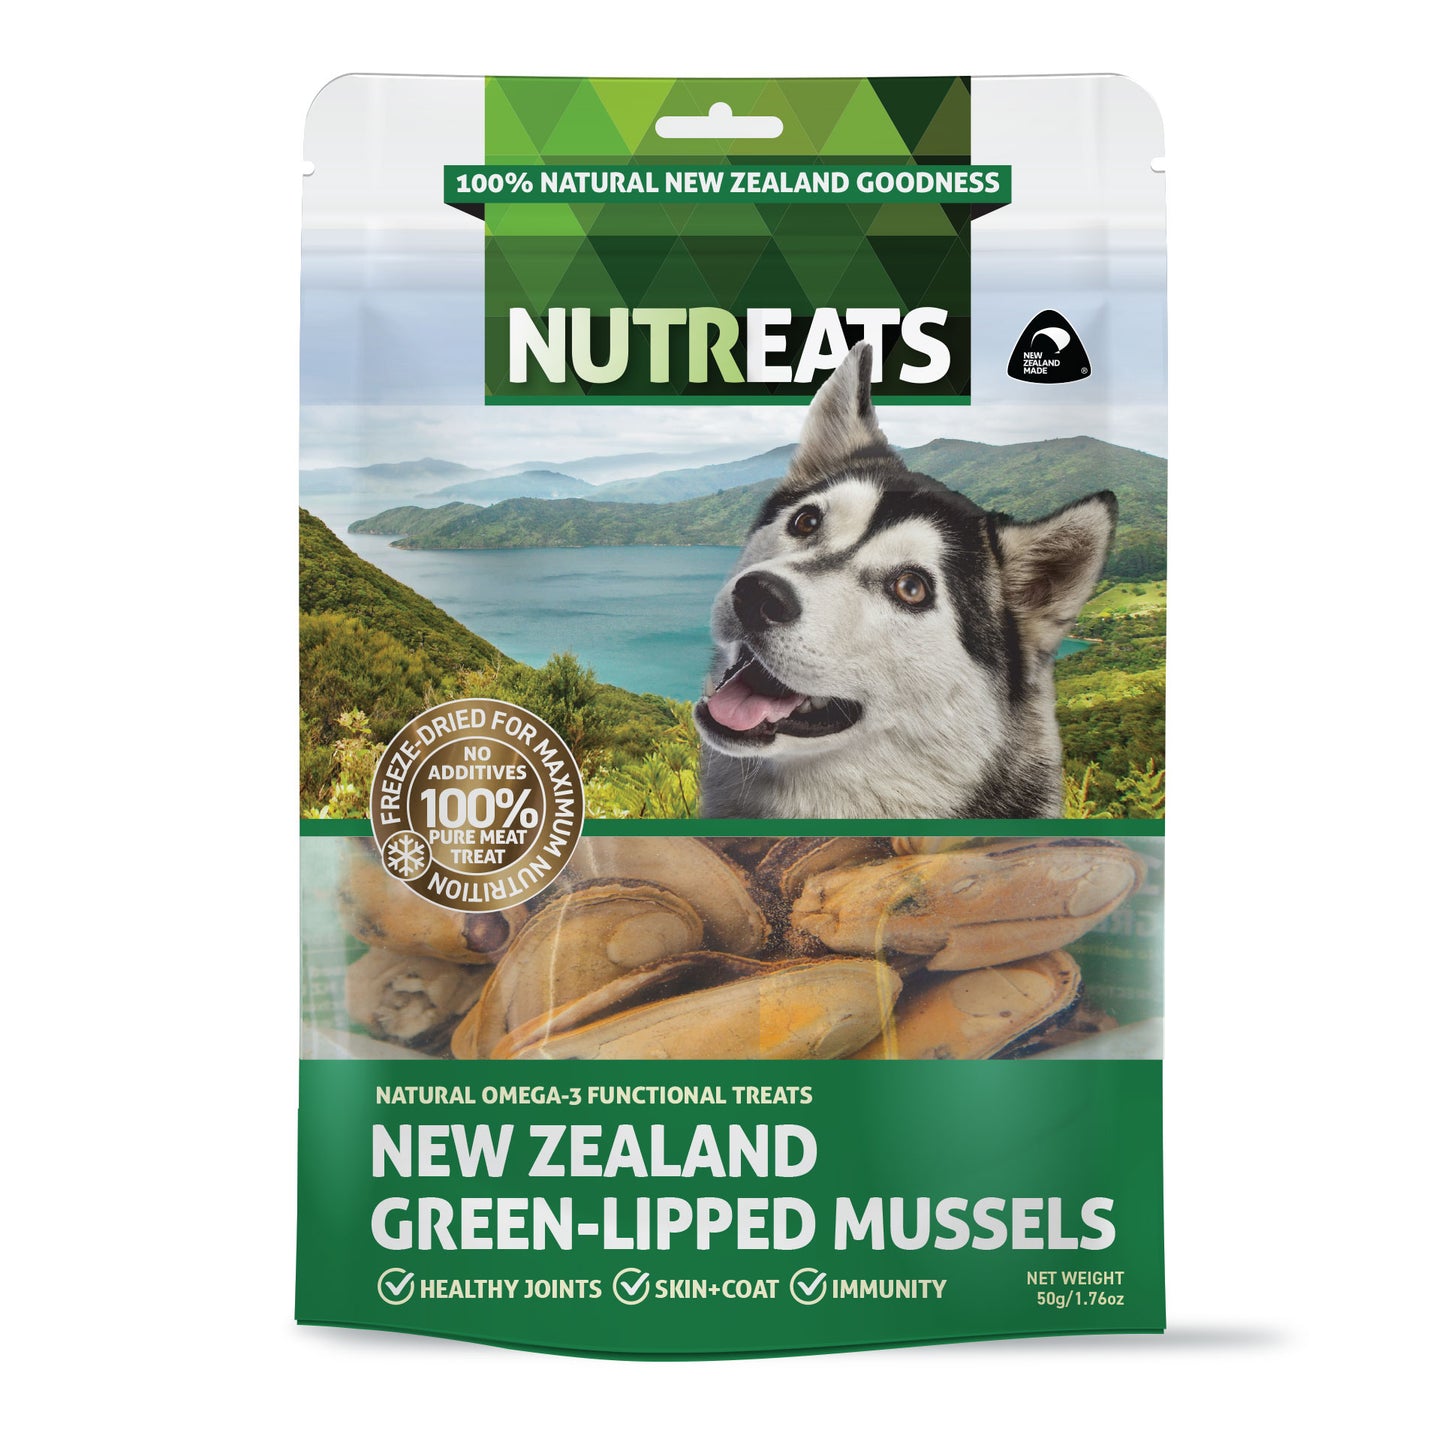 New Zealand Green-lipped mussels. Freeze-dried and 100% natural. Great for supporting healthy joints, ski and glossy coat and may help support immunity. Natural Omega-3 functional treats. 100% natural dog treats supporting health and immunity.